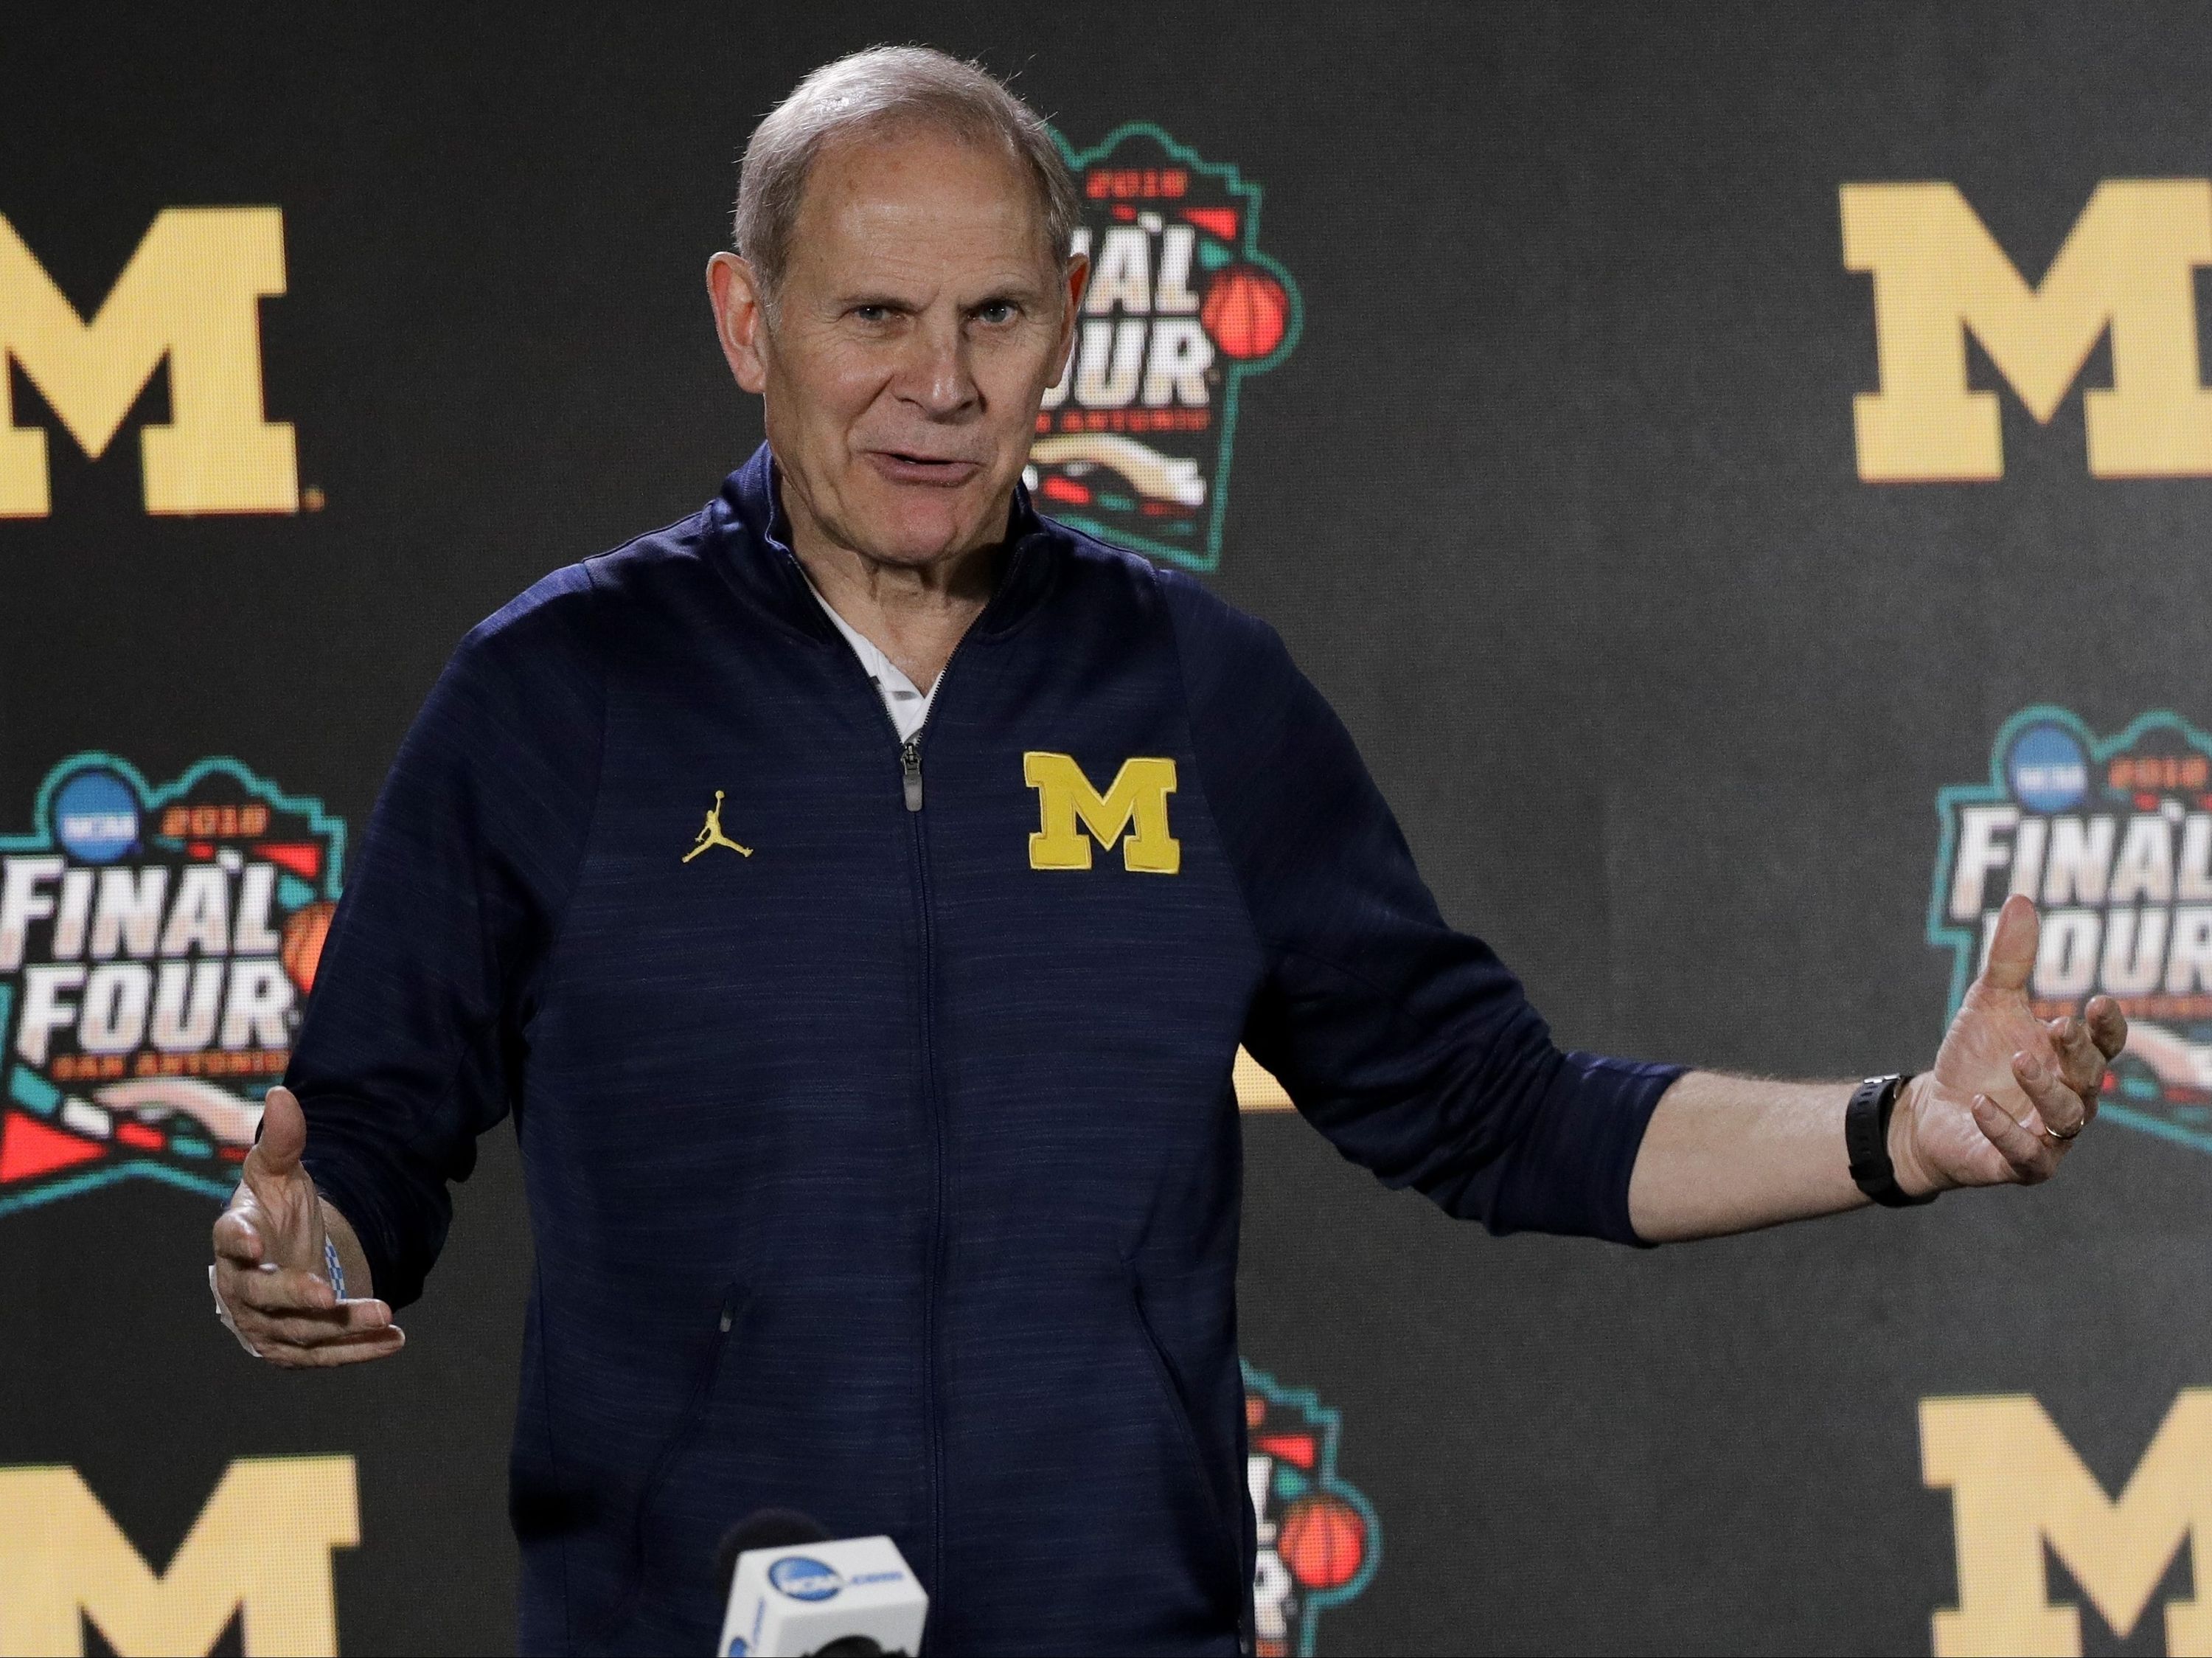 U of M coach Beilein headed to NBA’s Cleveland Cavaliers | National Post3700 x 2773